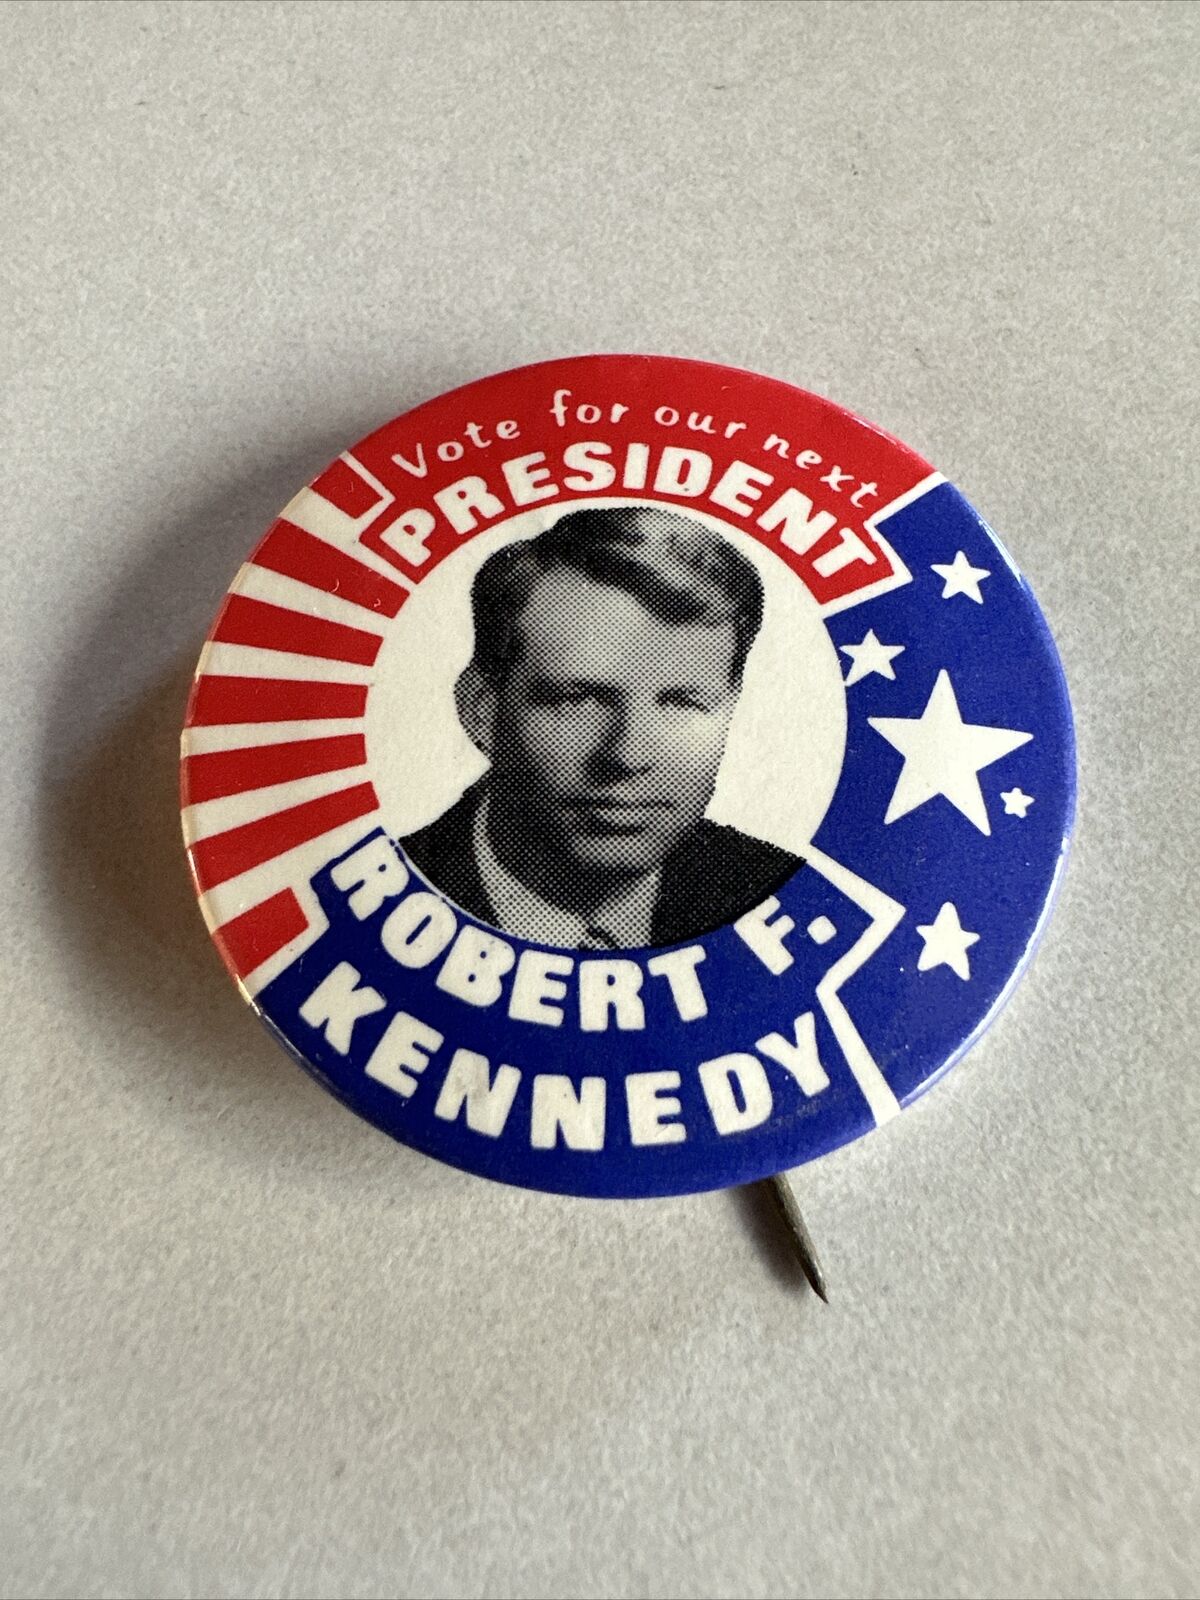 Vtg. 1968 Robert F. Kennedy Vote for Our Next President Celluloid Pinback Button